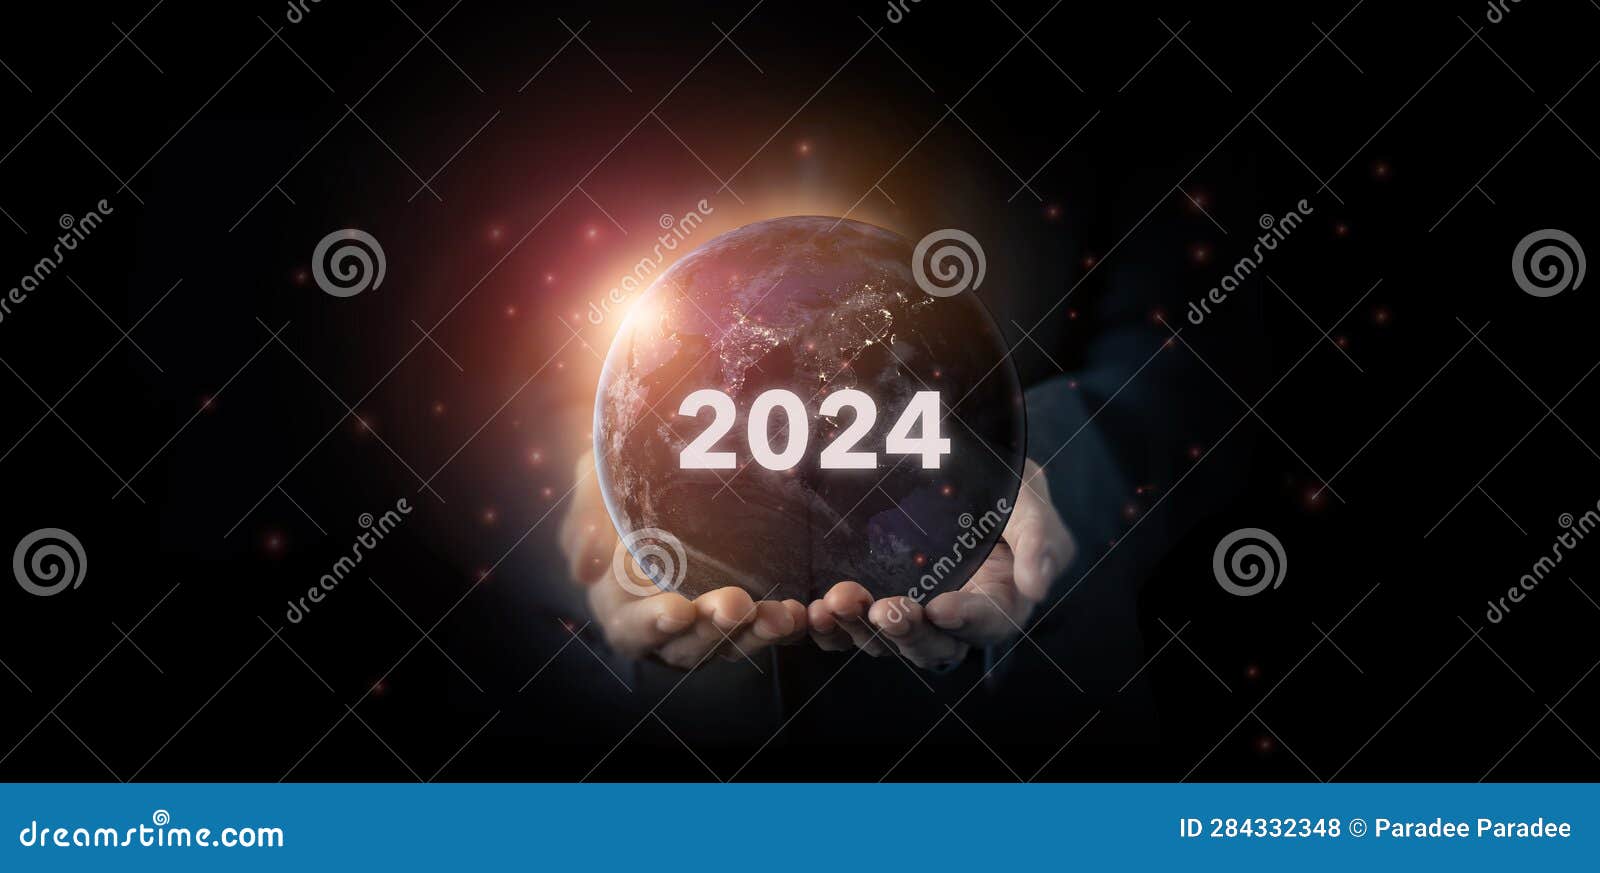 2024 Digital Transformation Trends. Stock Photo Image of disruptions